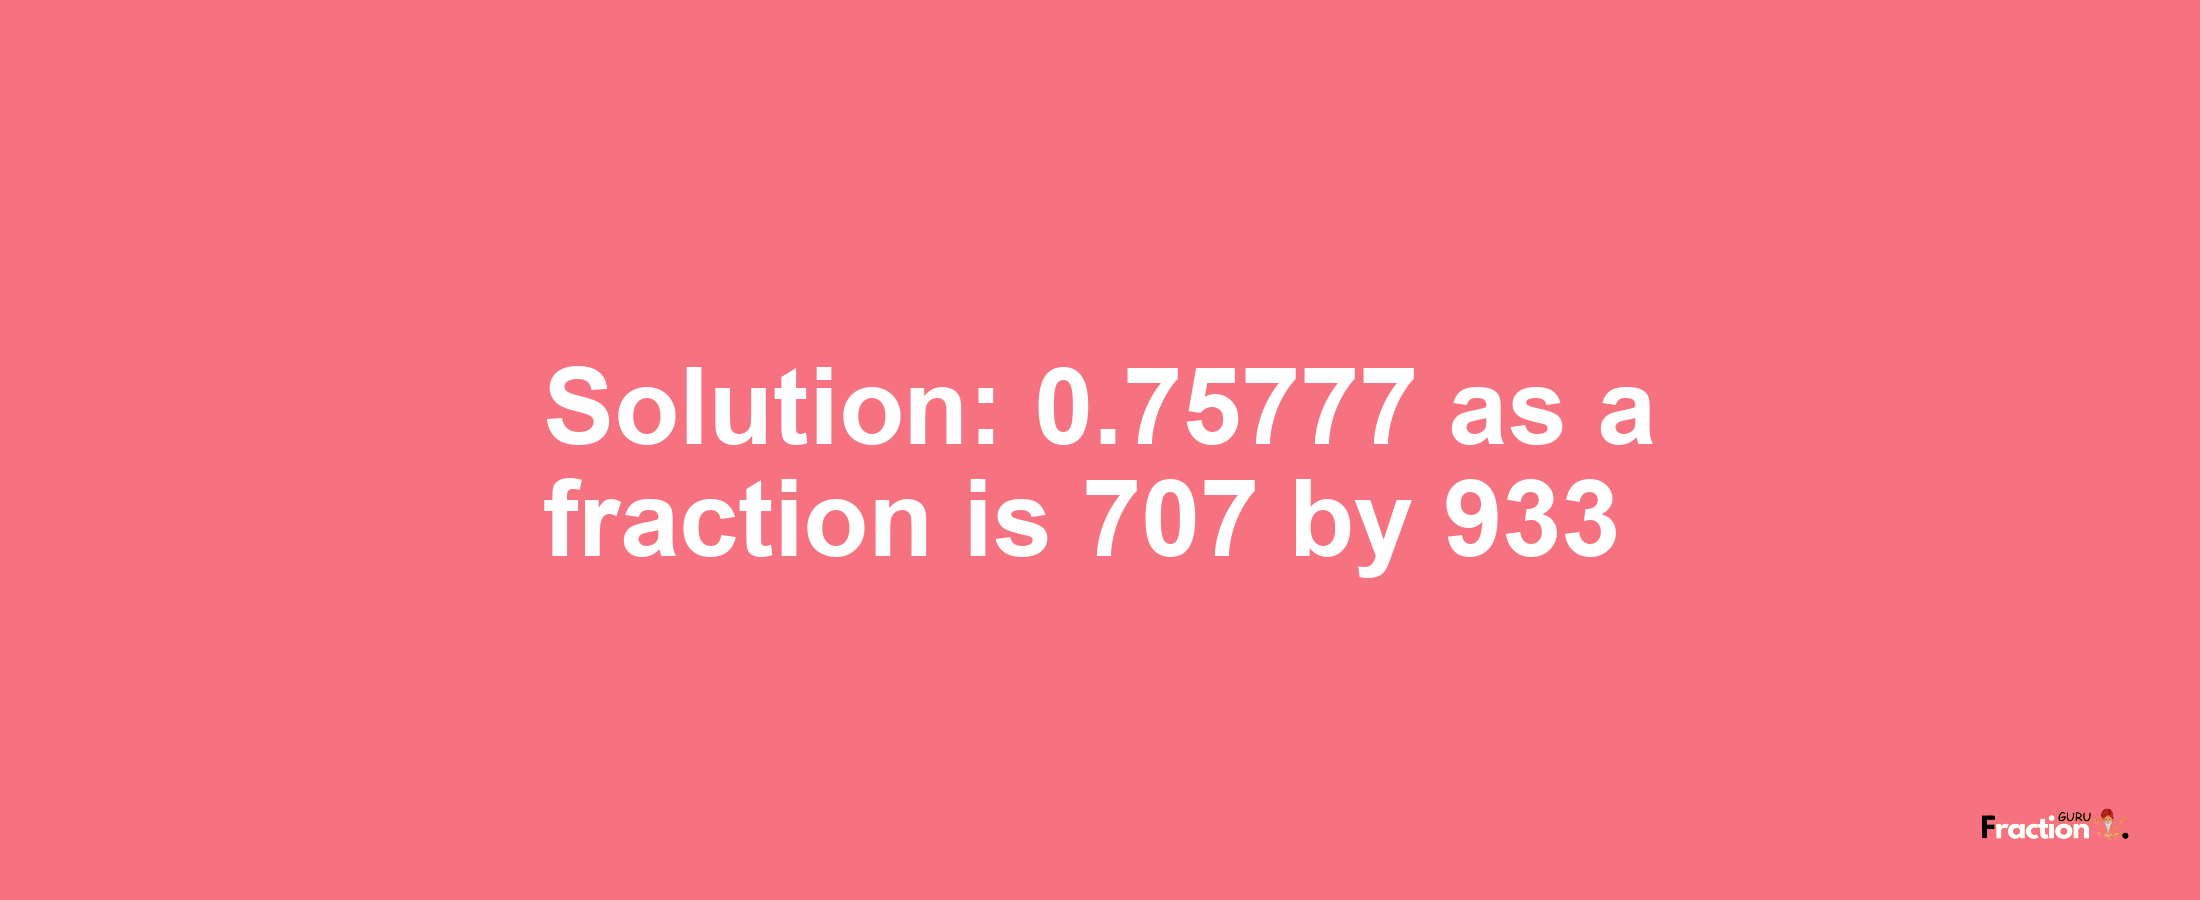 Solution:0.75777 as a fraction is 707/933